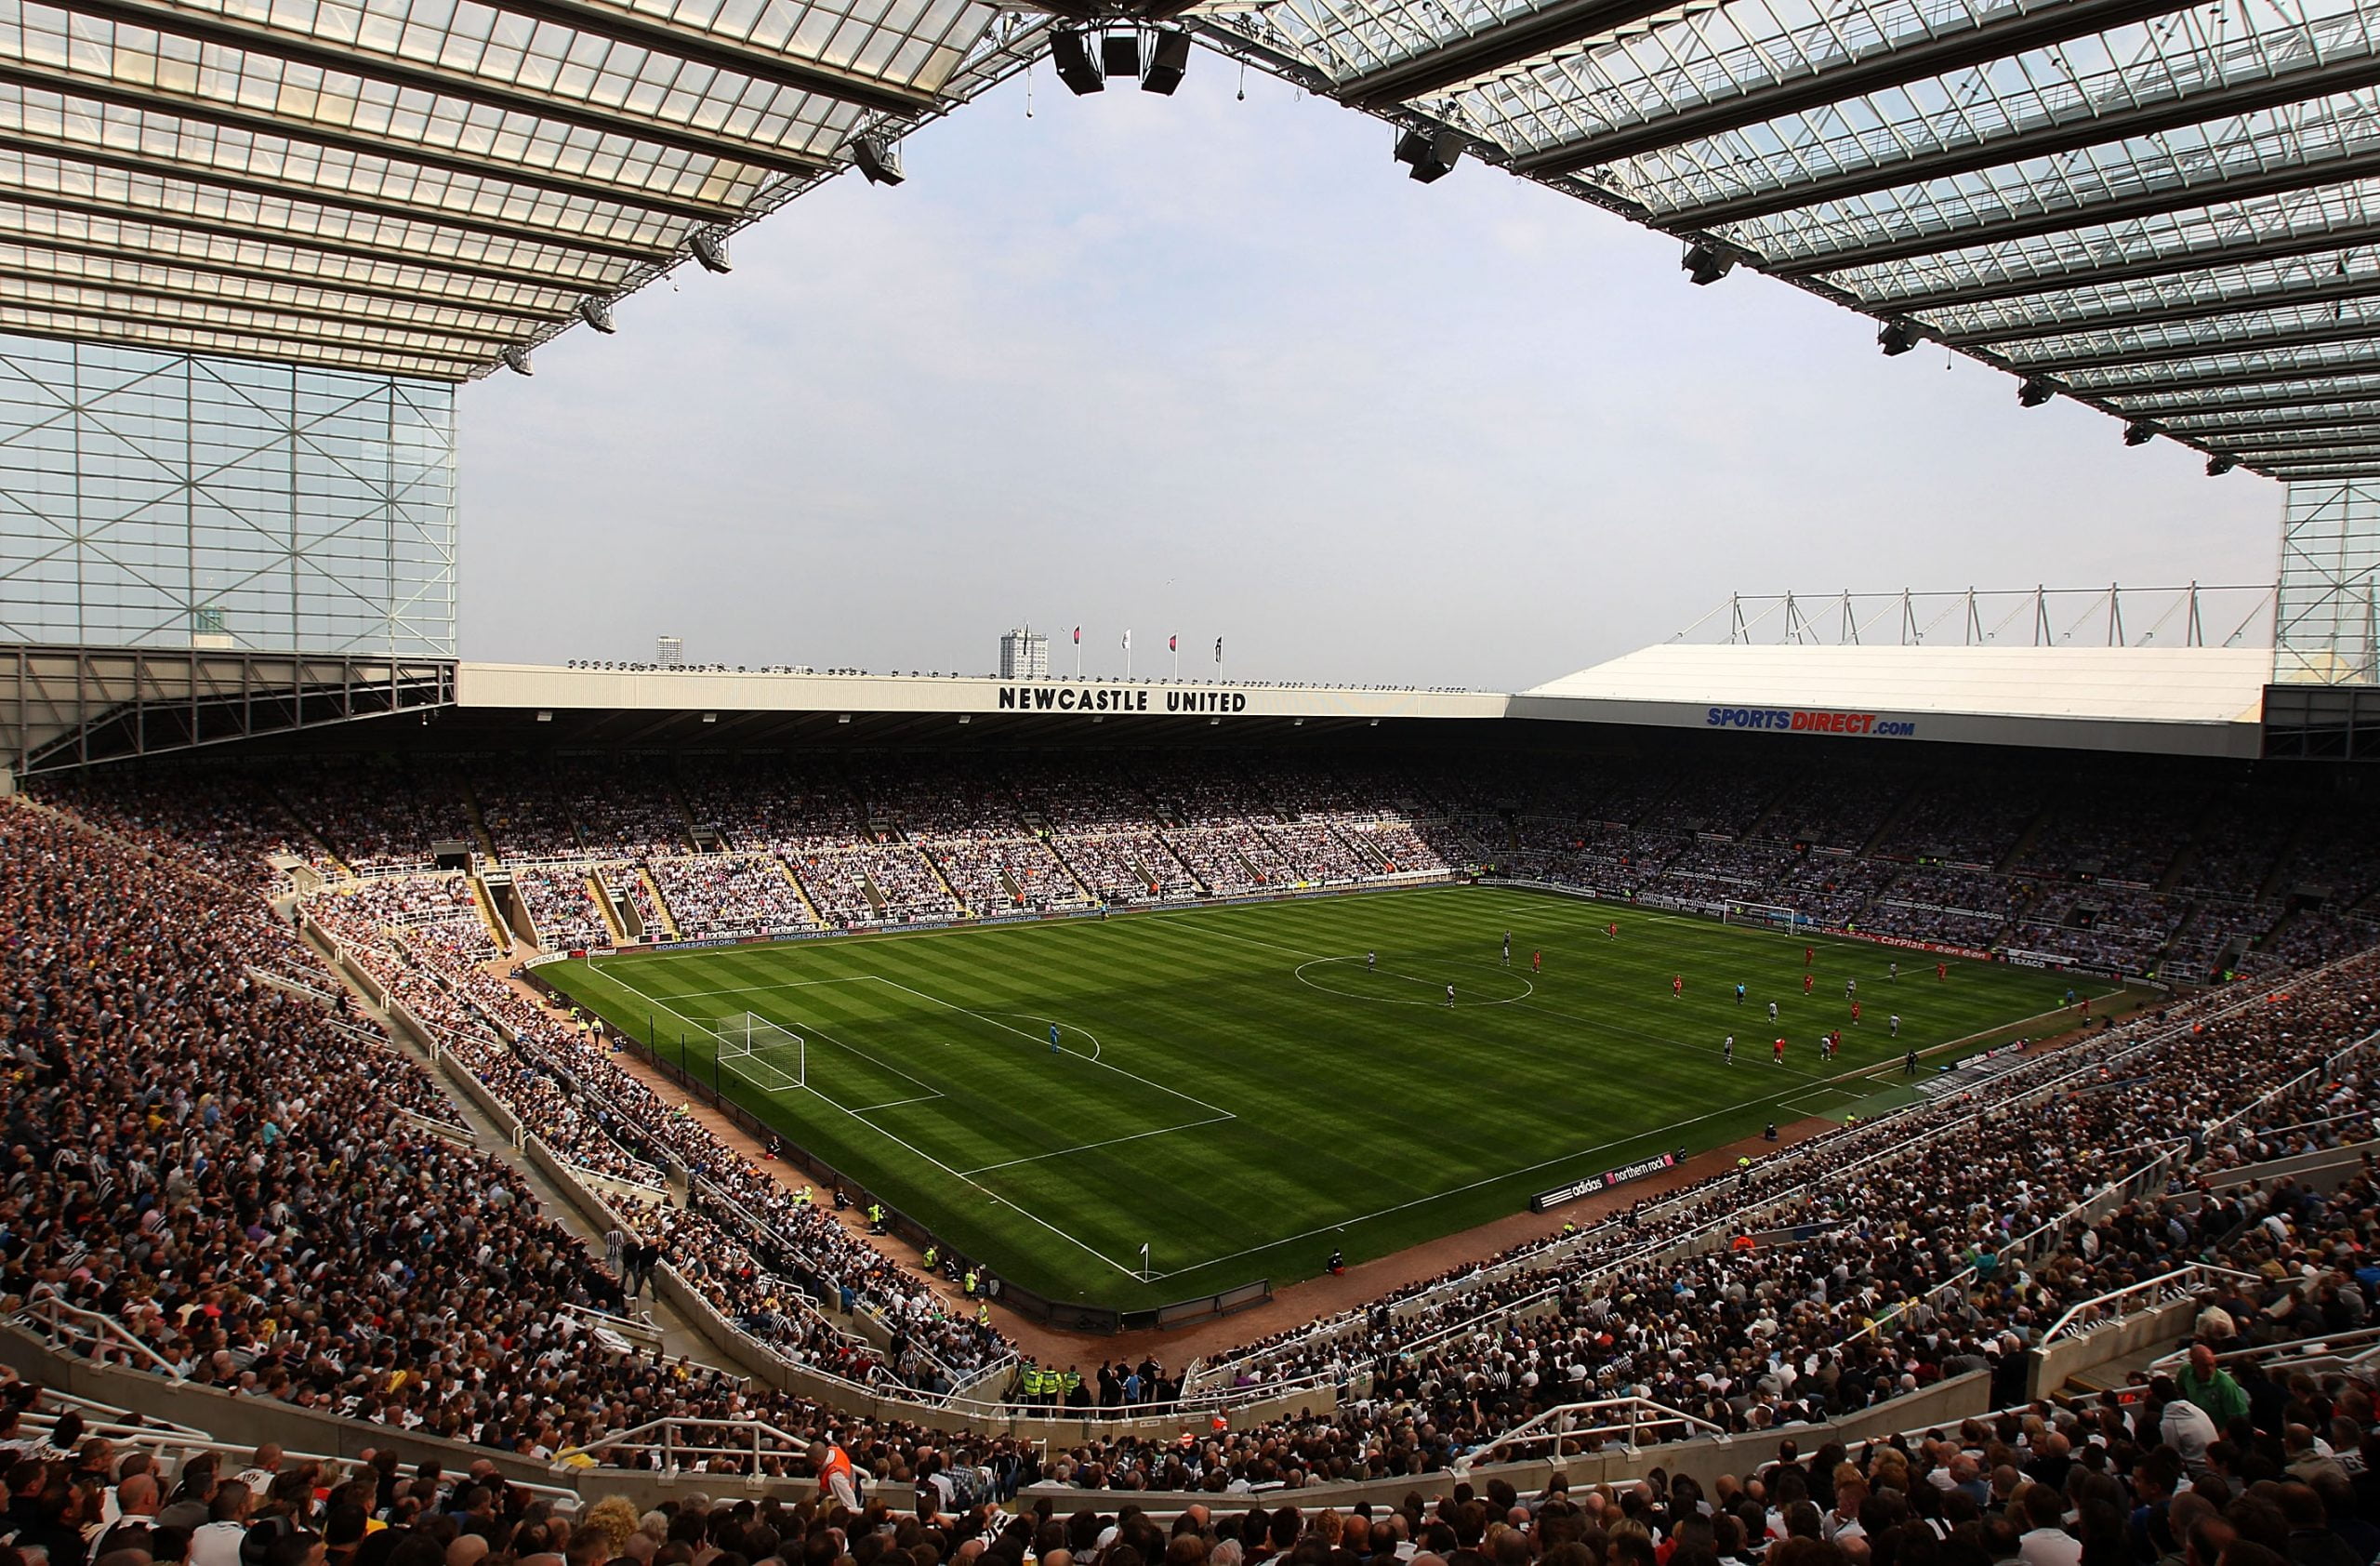 NEWCASTLE UPON TYNE, ENGLAND - APRIL 24:  A general view of the action at St James' Park during the Coca Cola Championship match between Newcastle United and Ipswich Town at St. James Park on April 24, 2010 in Newcastle upon Tyne, England.  (Photo by Stu Forster/Getty Images)